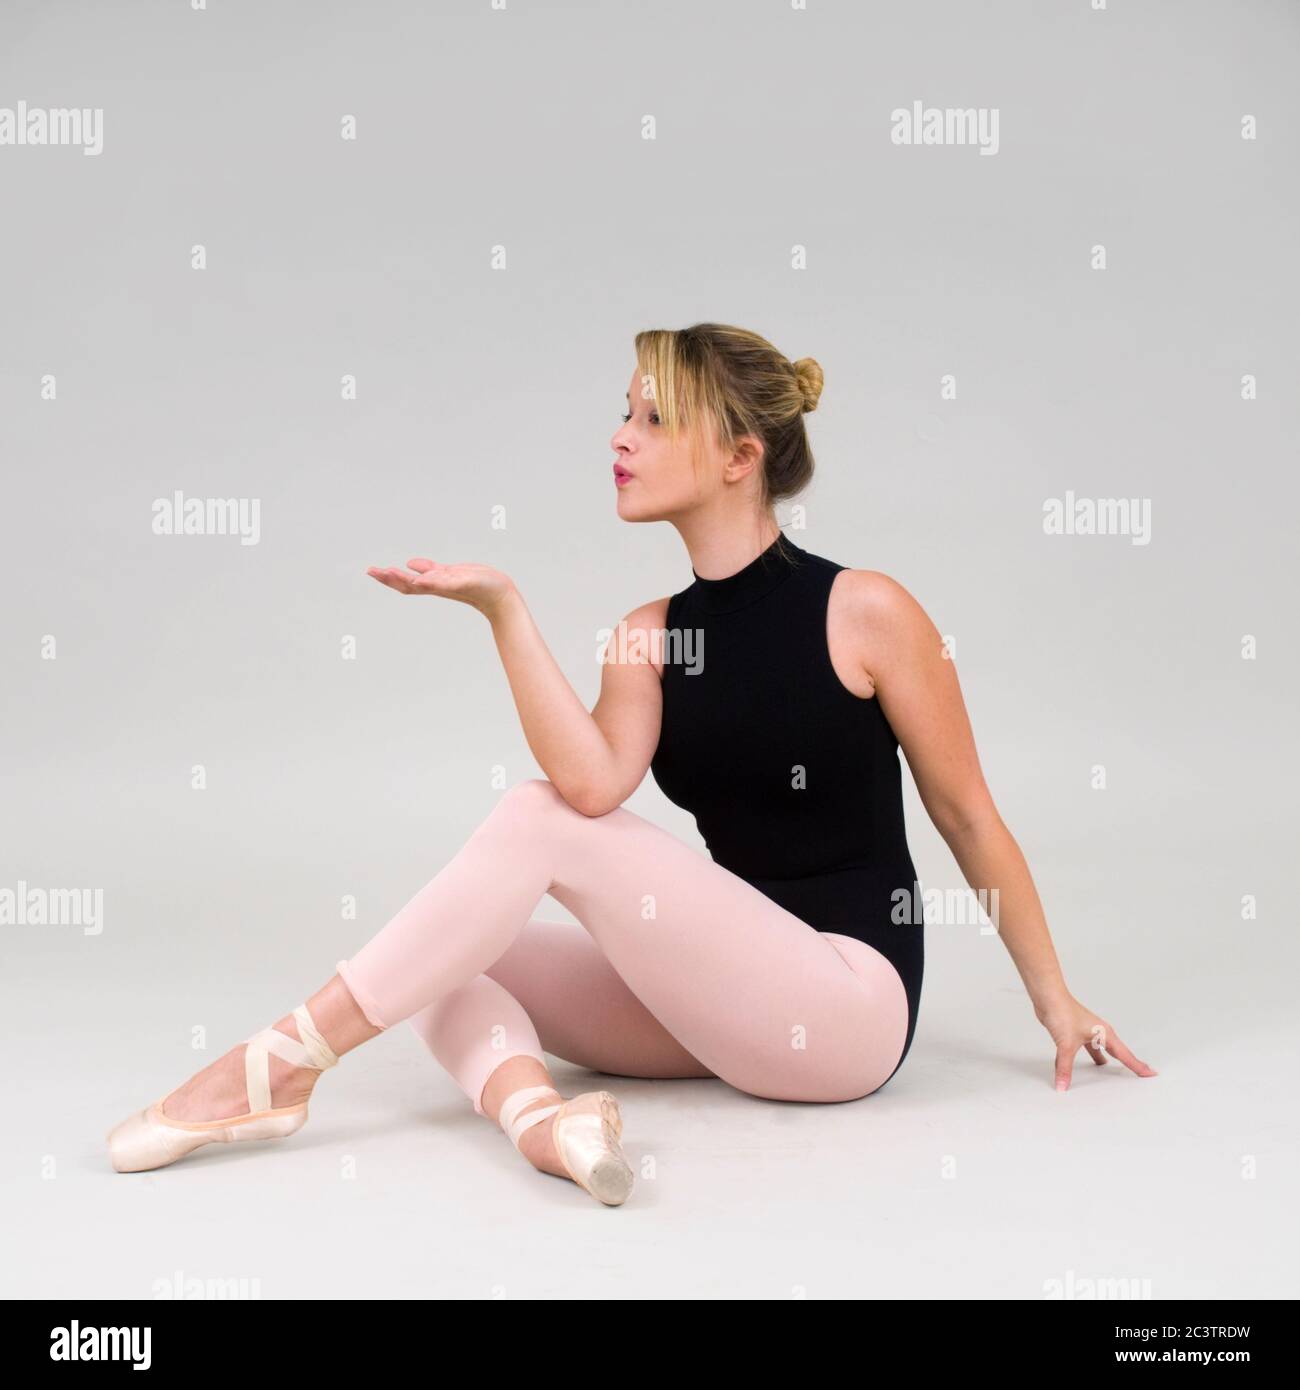 Female blond Ballet Dancer sits on floor and blows something out of her outstretched hand Stock Photo